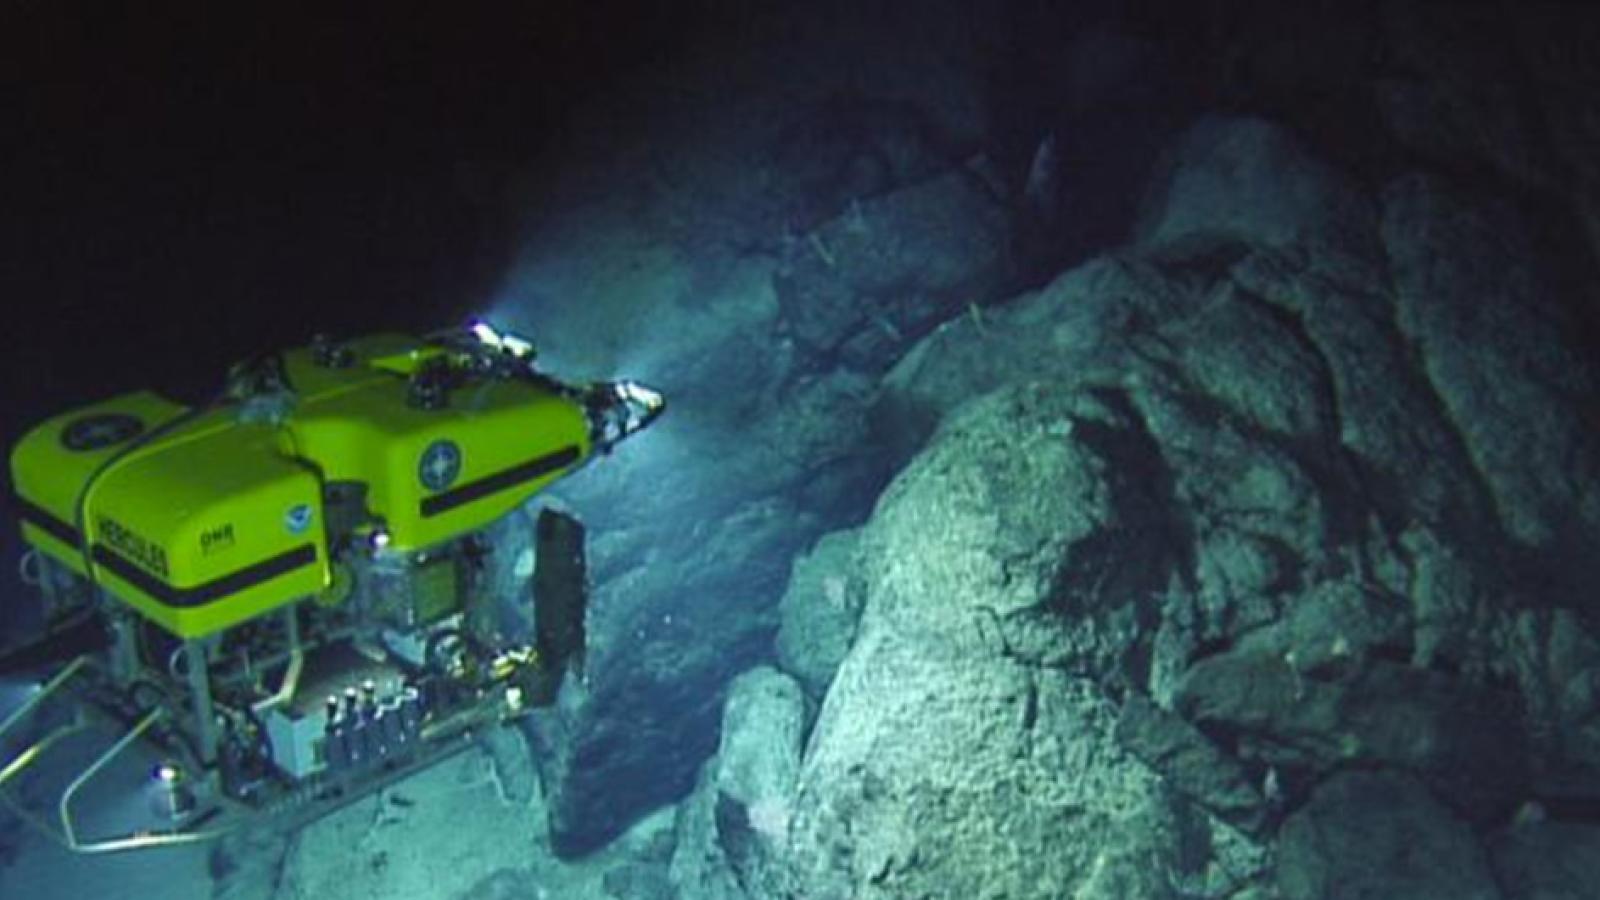 remote-operated submersible exploring underwater geologic formations